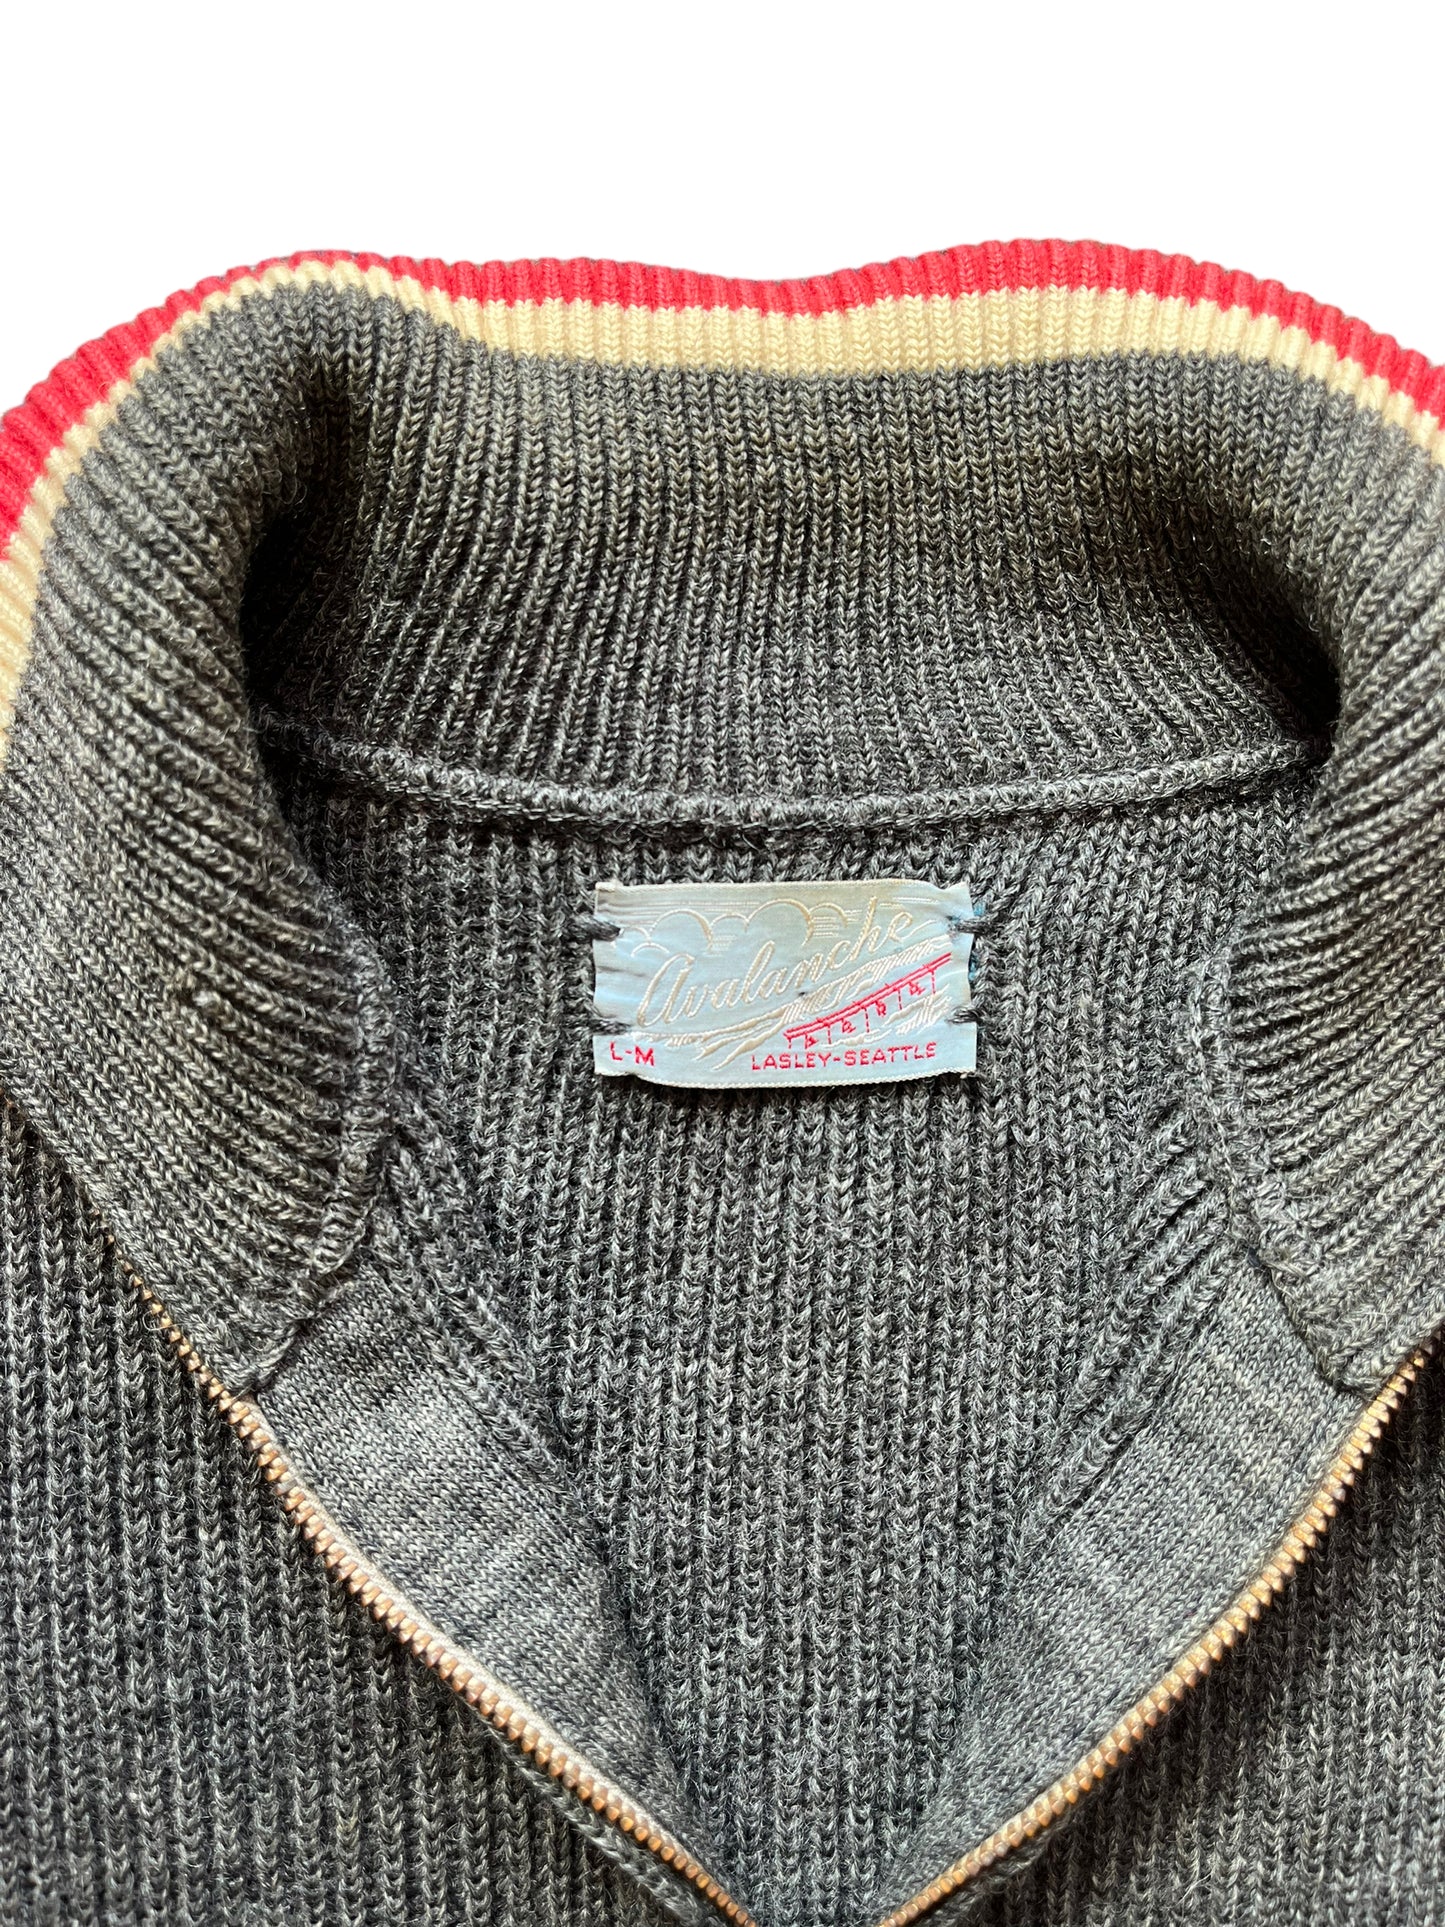 Tag and open collar view of Vintage 1950s Lasley-Seattle Avalanche Zip-up Sweater